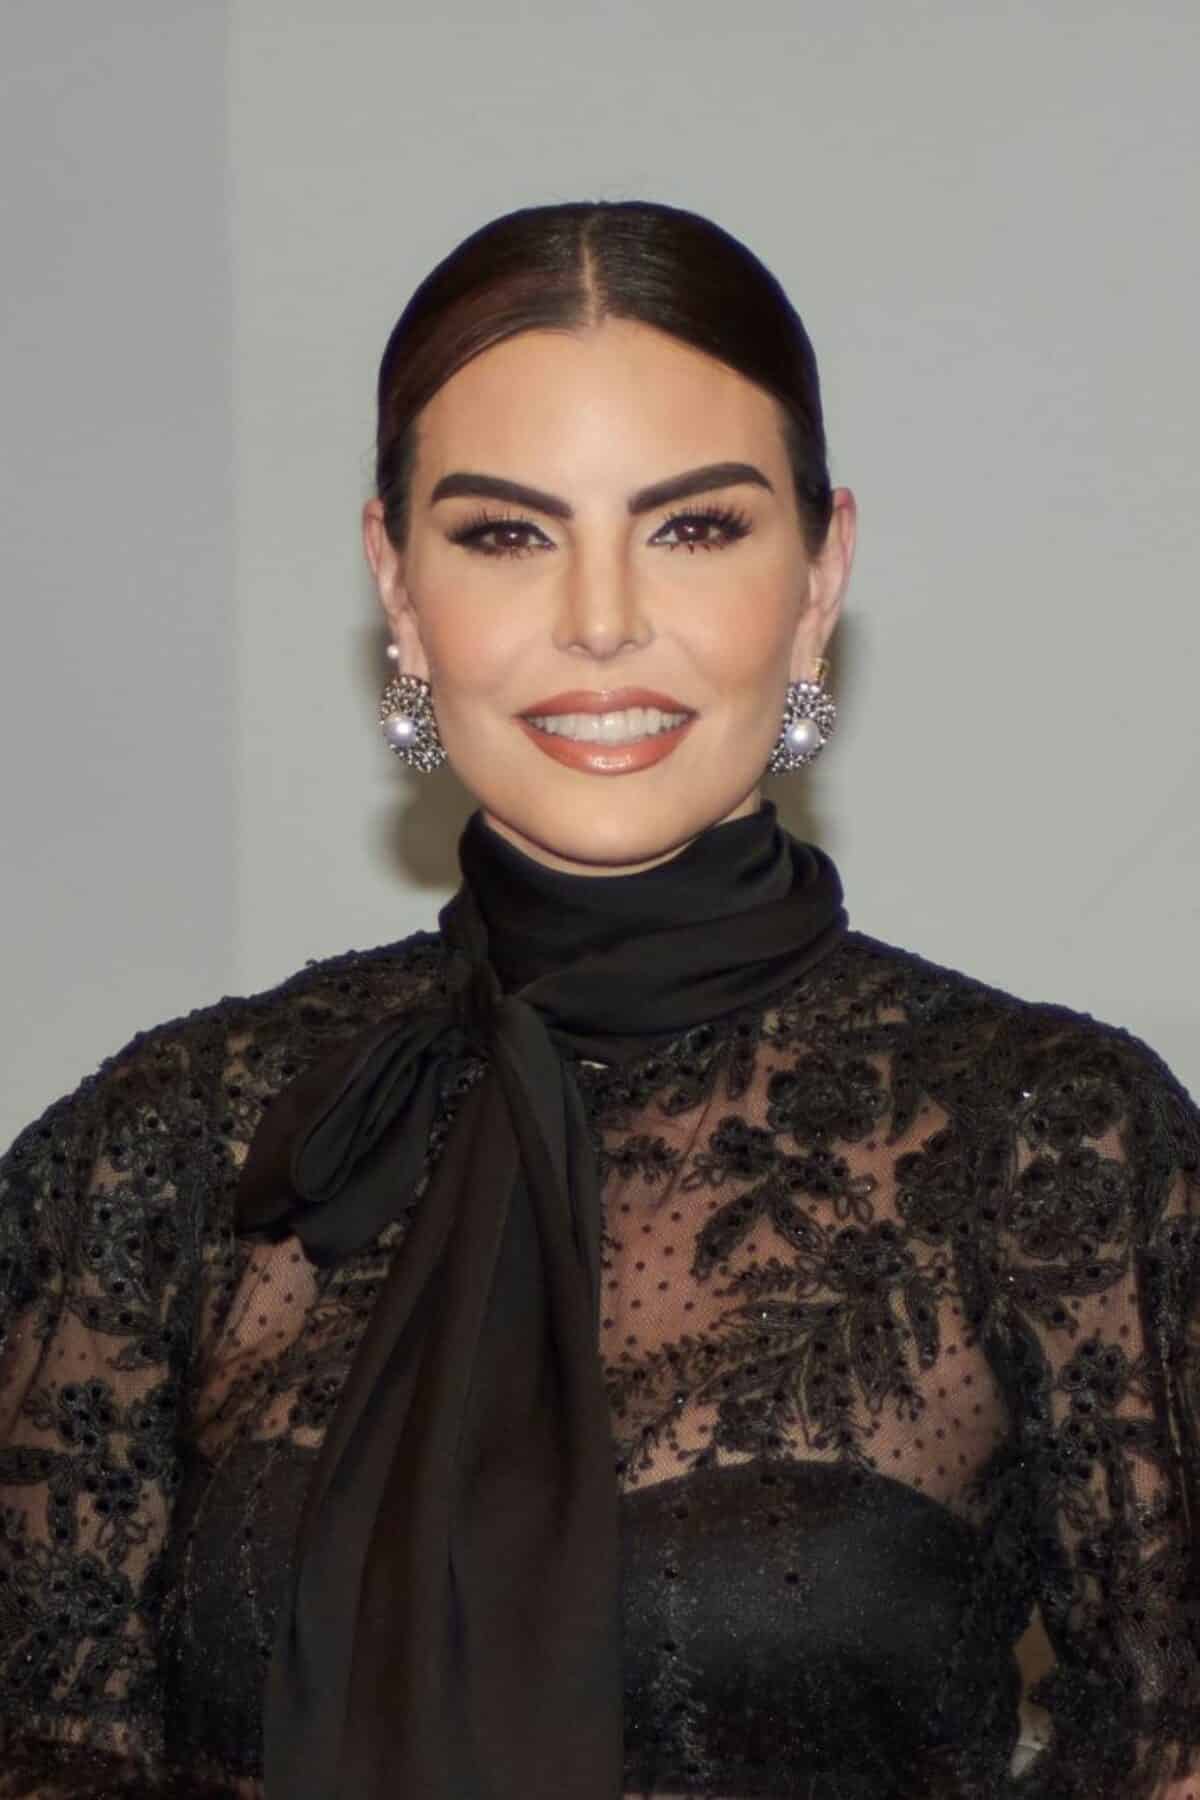 November 20, 2023, Mexico City, Mexico: Cynthia de la Vega new director of Miss Universe Mexico attends a press conference at Torre Mayor. (Photo By Jaime Nogales/ Eyepix Group) (Photo credit should read Jaime Nogales/ Eyepix Group/Future Publishing via Getty Images)